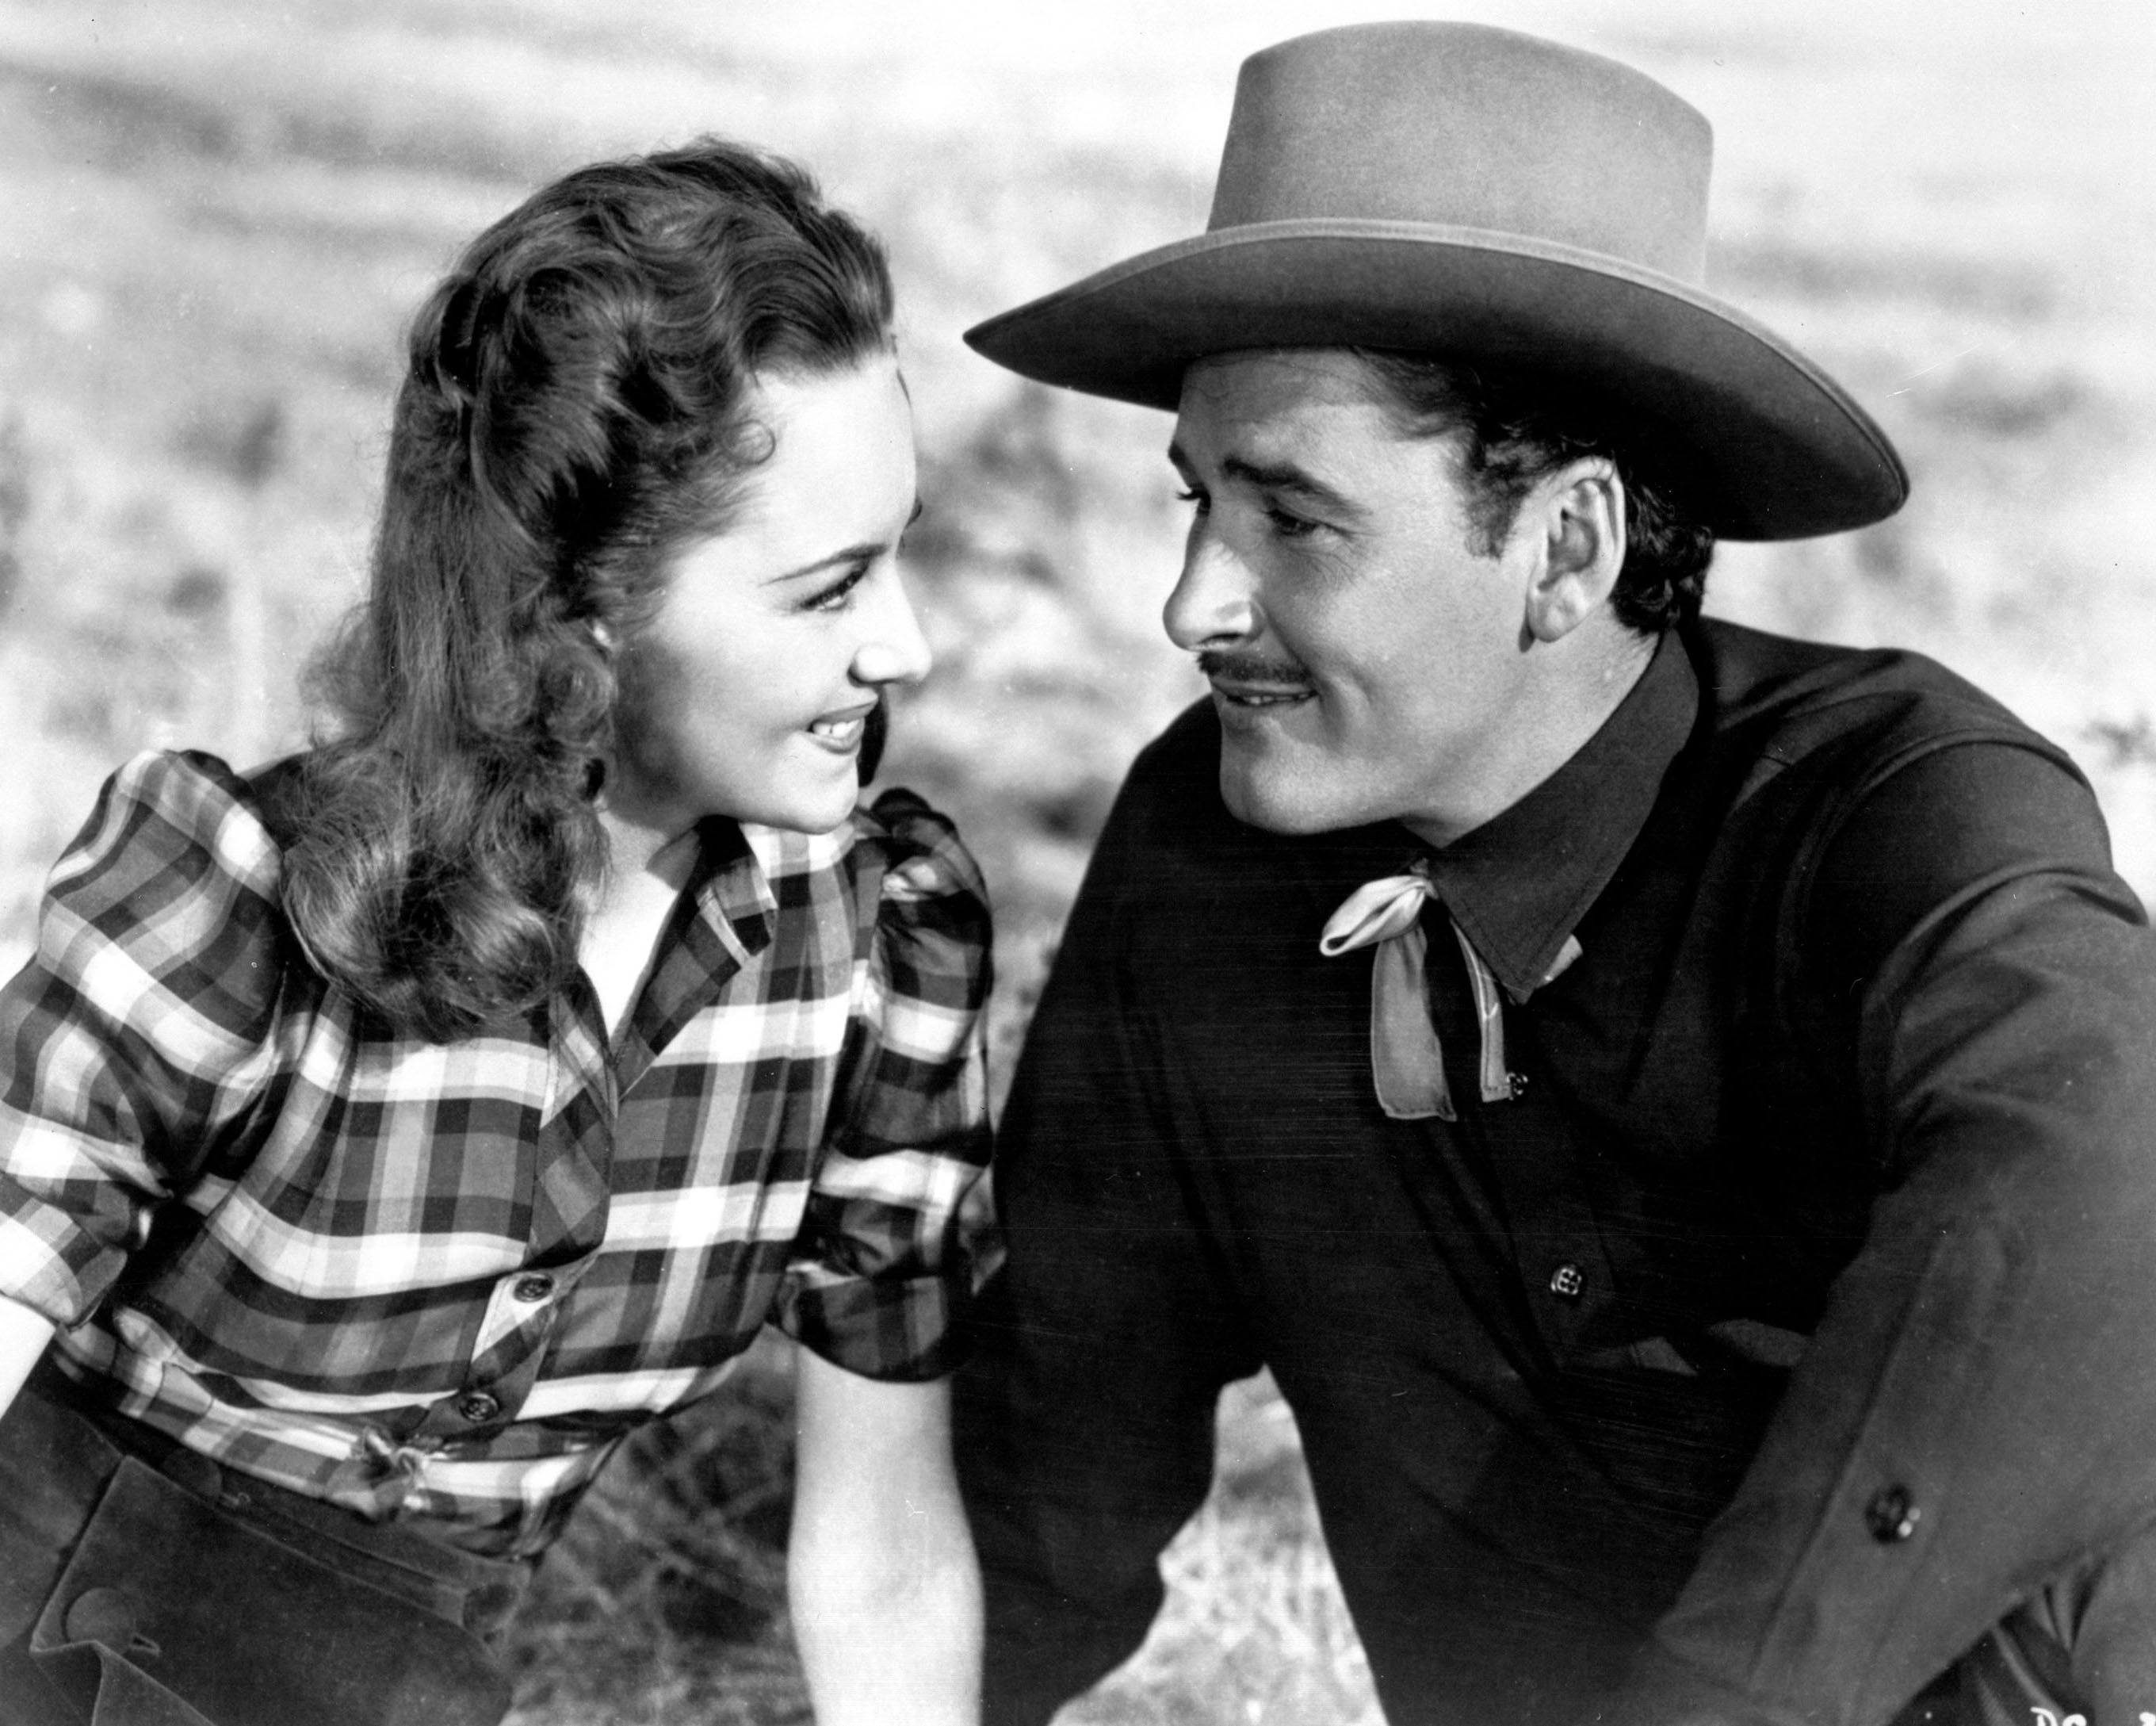 Olivia de Havilland and Errol Flynn in the western movie "Dodge City," in 1939. | Source: Silver Screen Collection/Getty Images